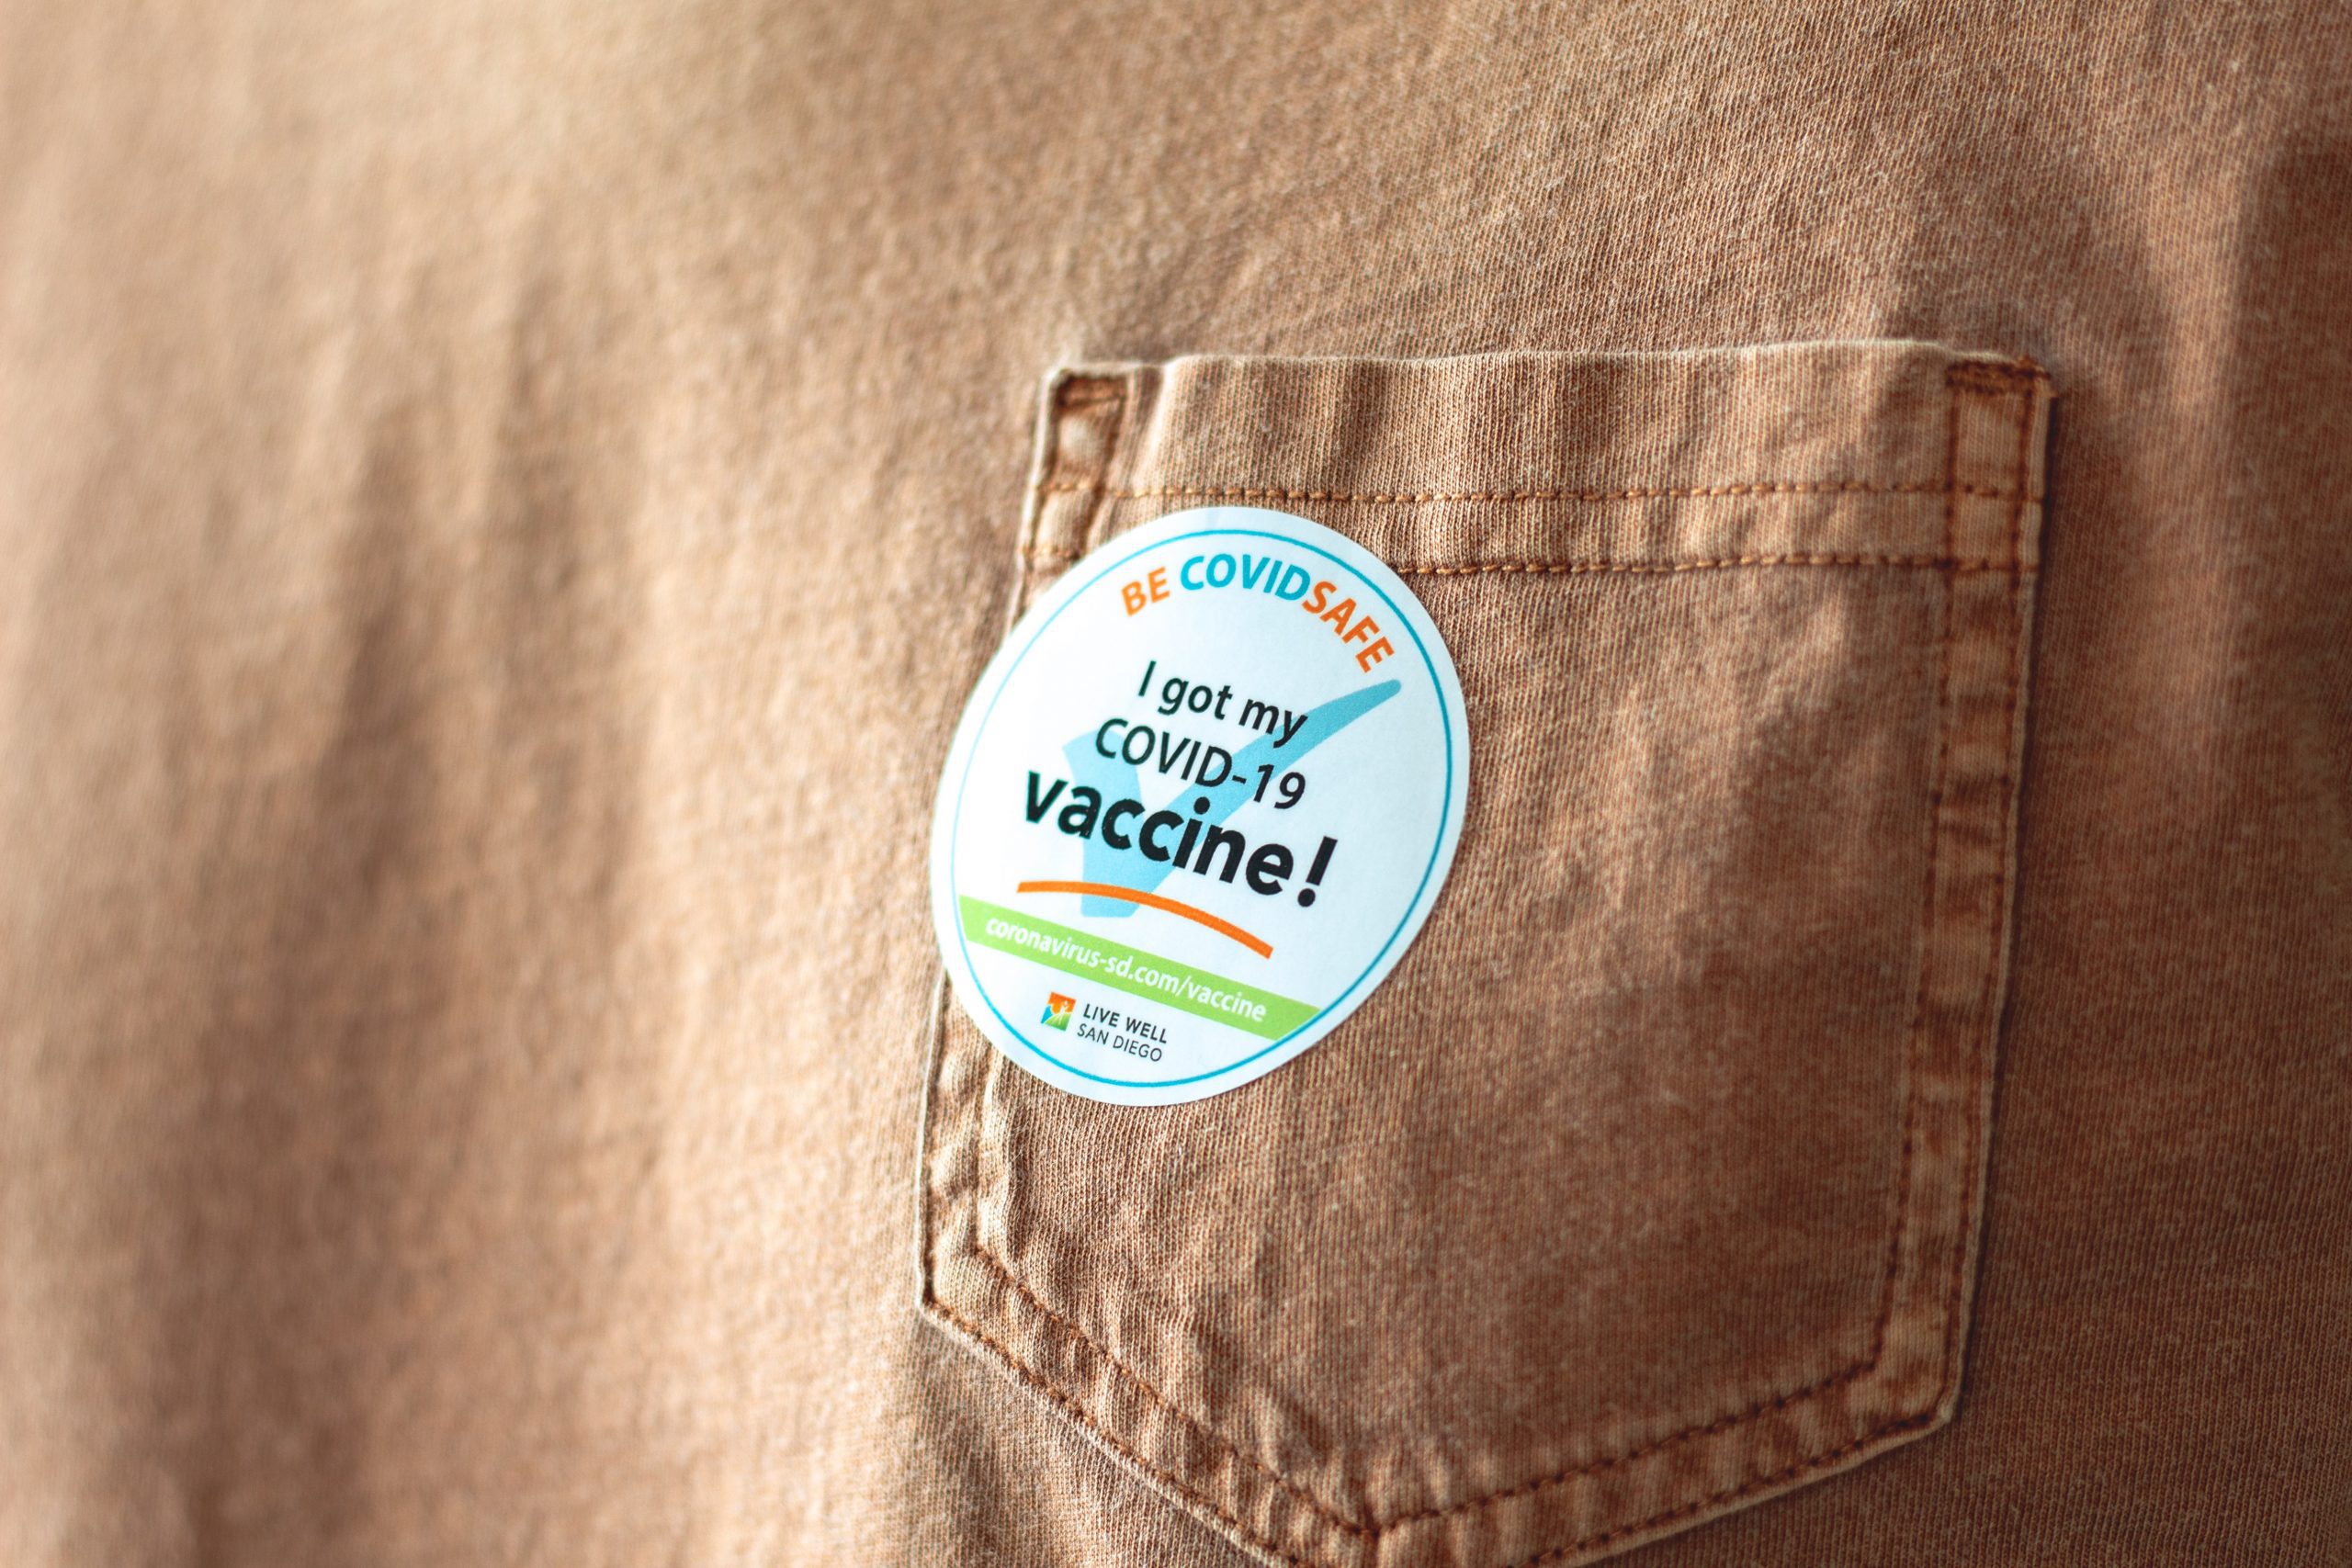 Photograph of pocket on brown fabric with a sticker stating "I got my COVID-19 vaccine!"